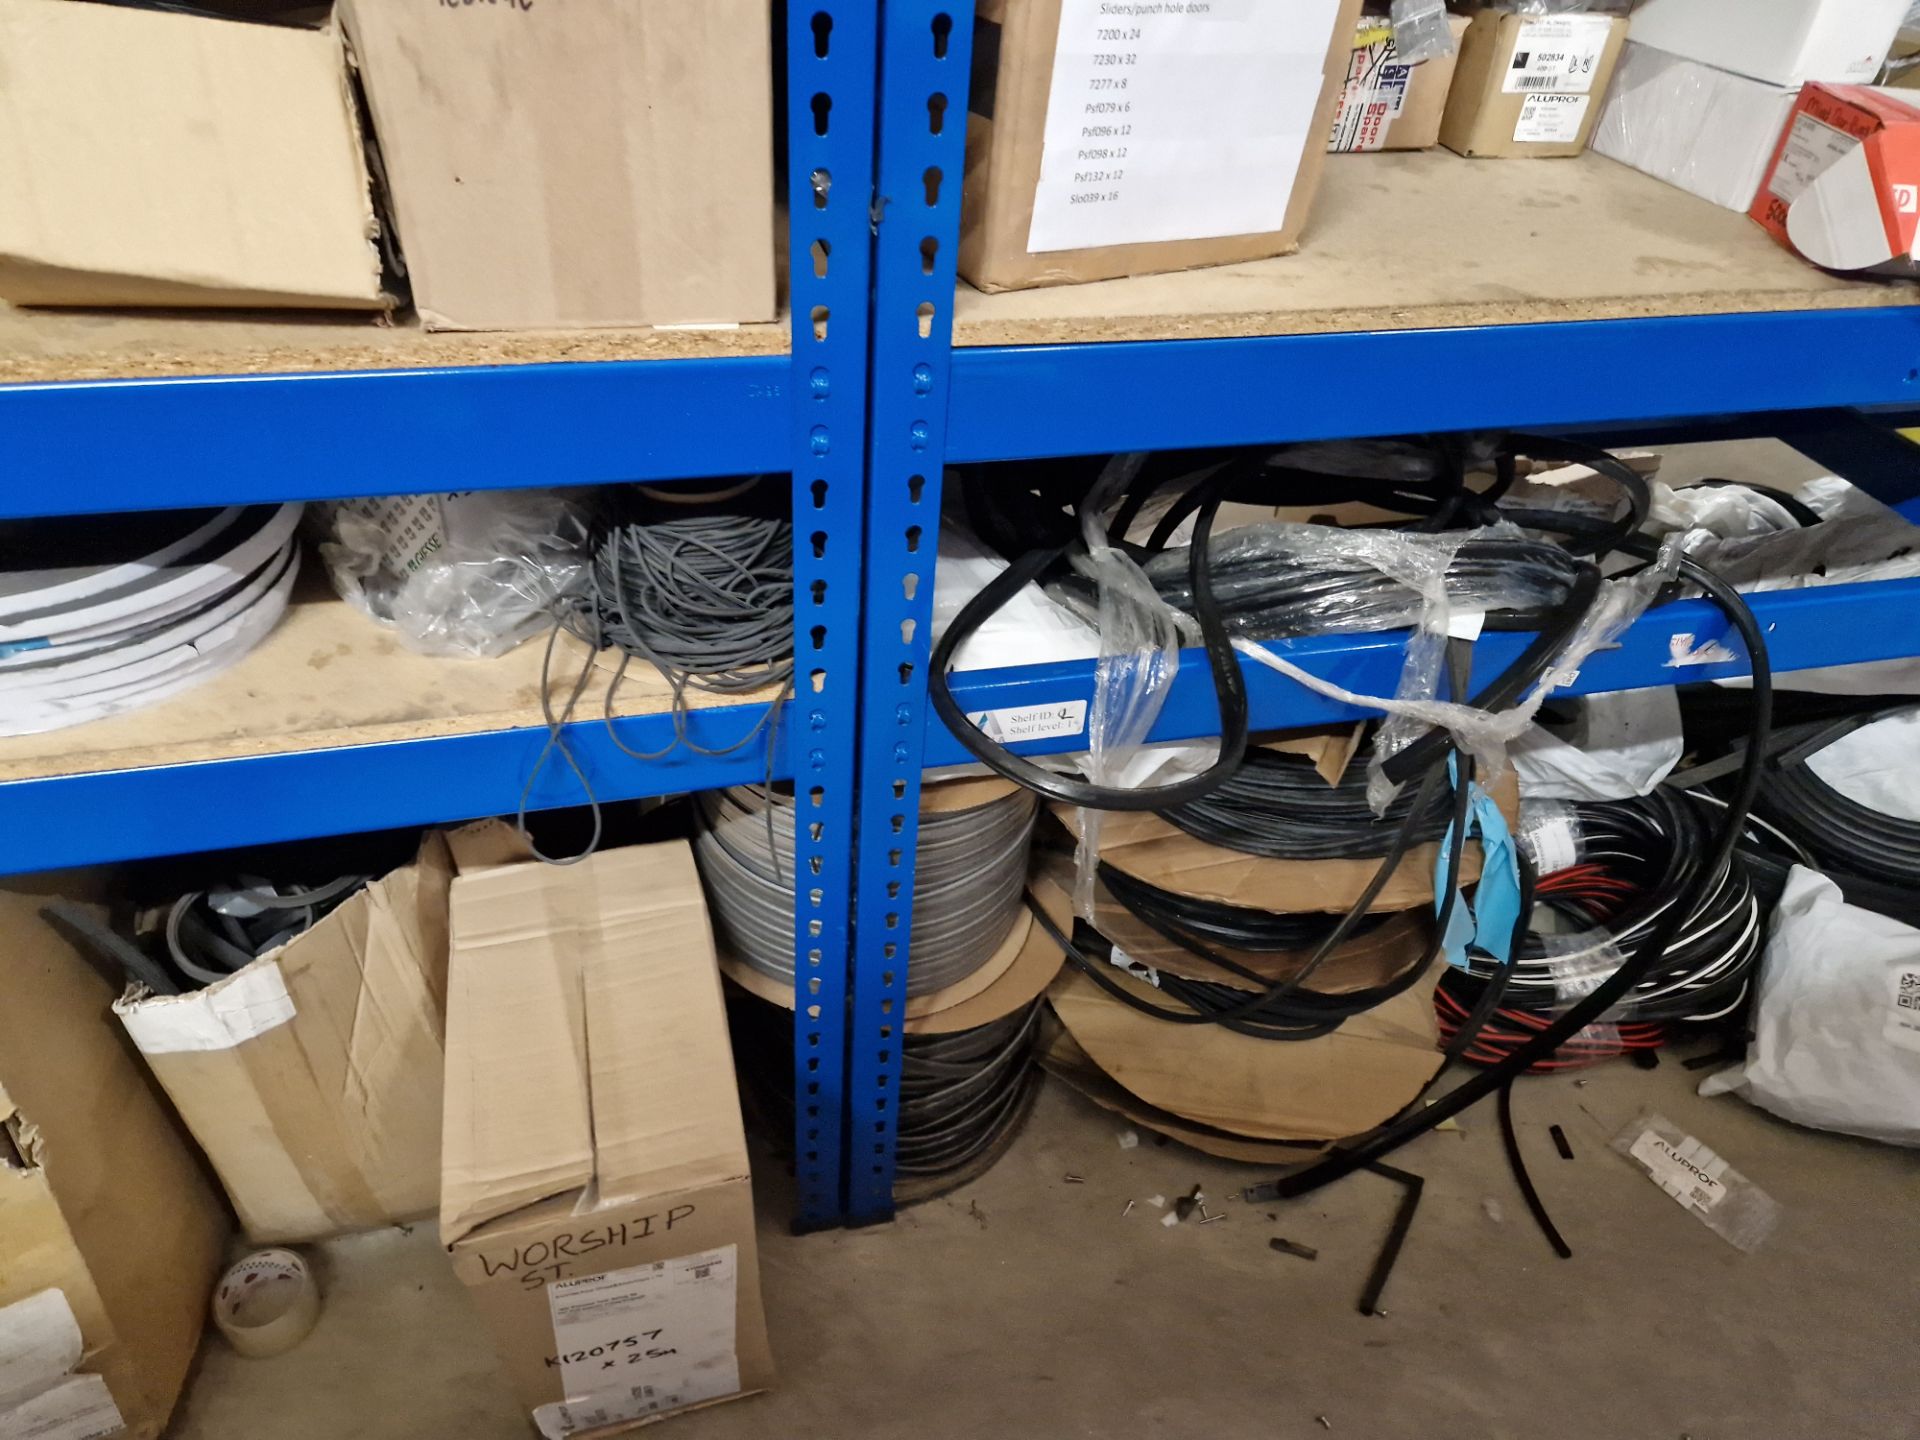 Contents to Four Bays of Shelving, including Rubber Gaskets, Aluminium Profile, End Caps, Screws, - Image 13 of 16